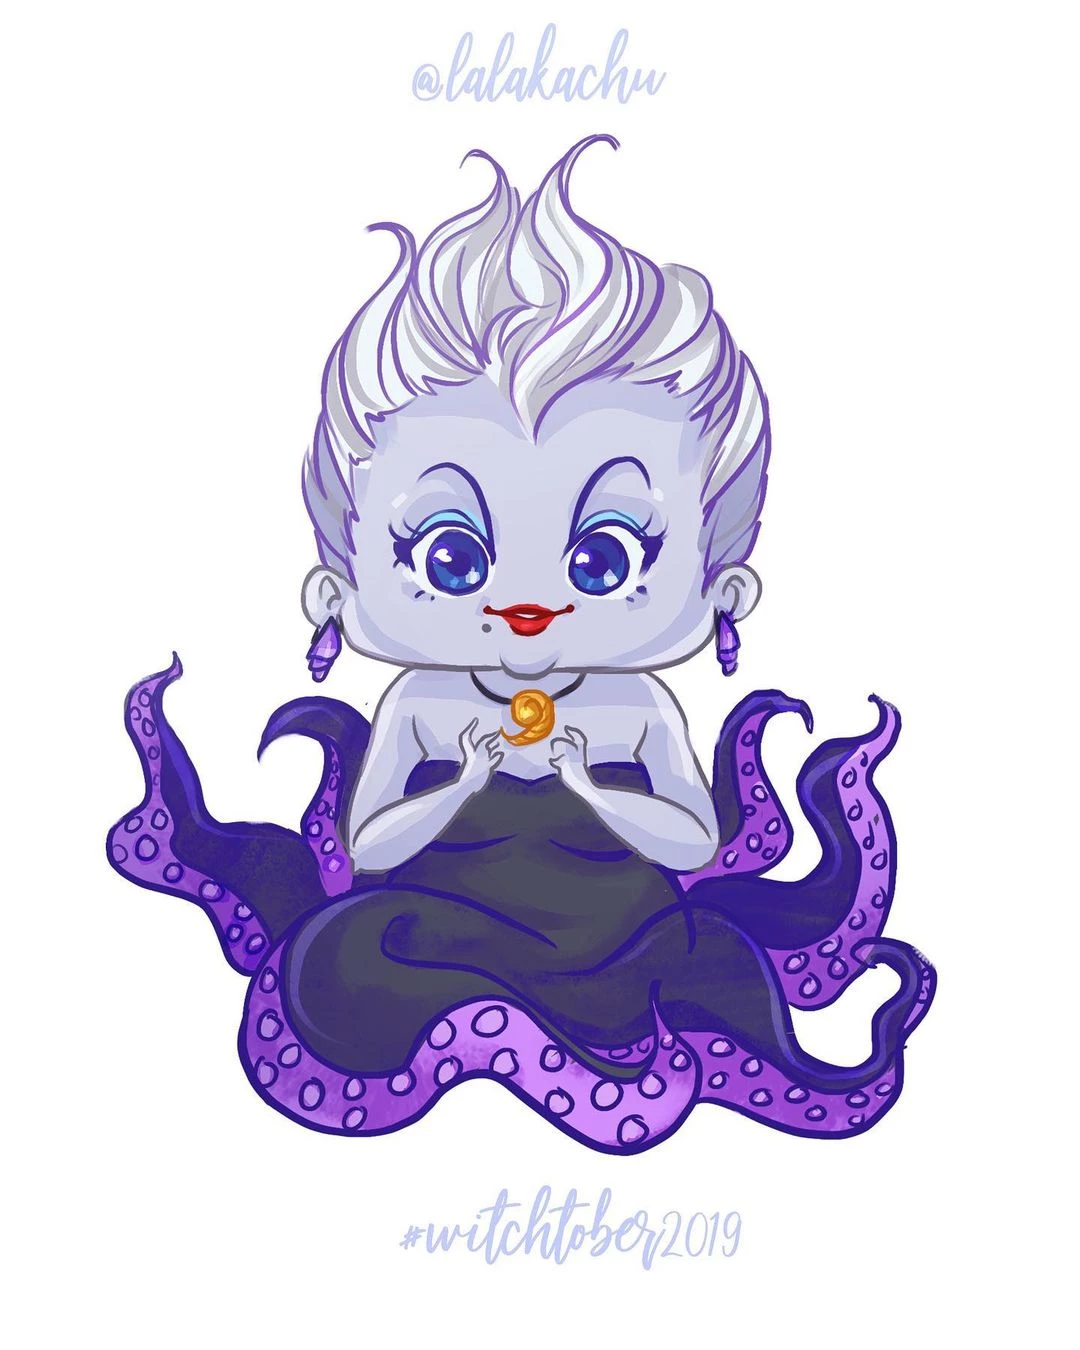 Before Turning Into A Sea Witch, Maybe Ursula Was Once A Mermaid Princess.